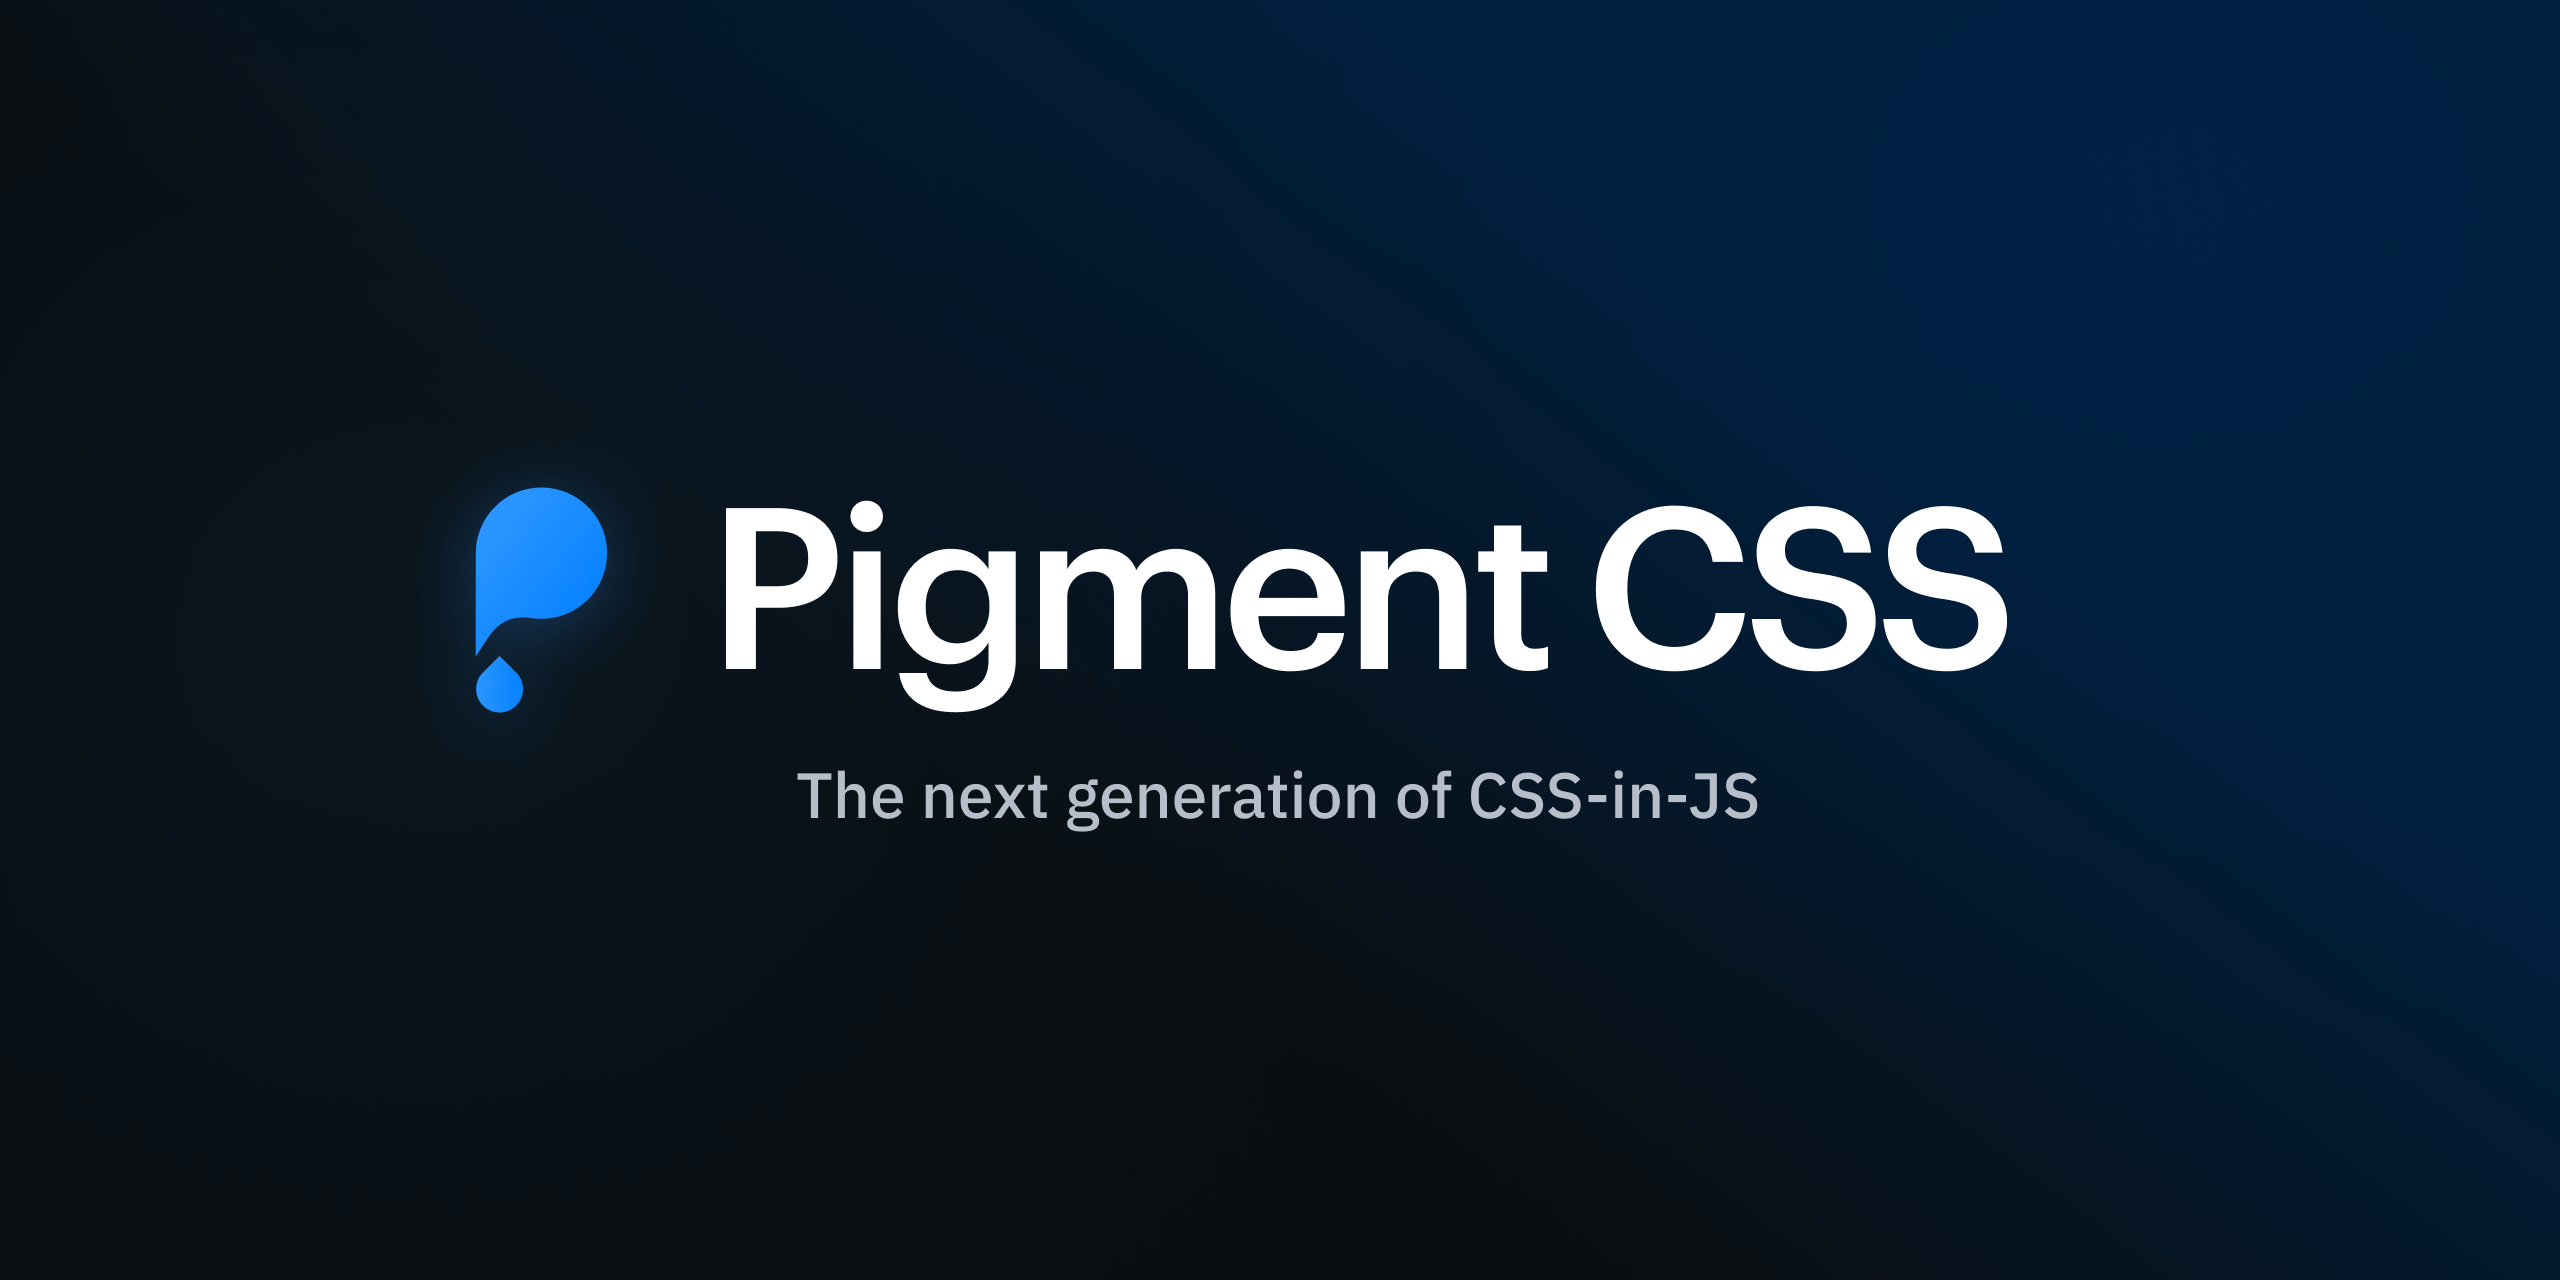 Introducing Pigment CSS: the next generation of CSS-in-JS